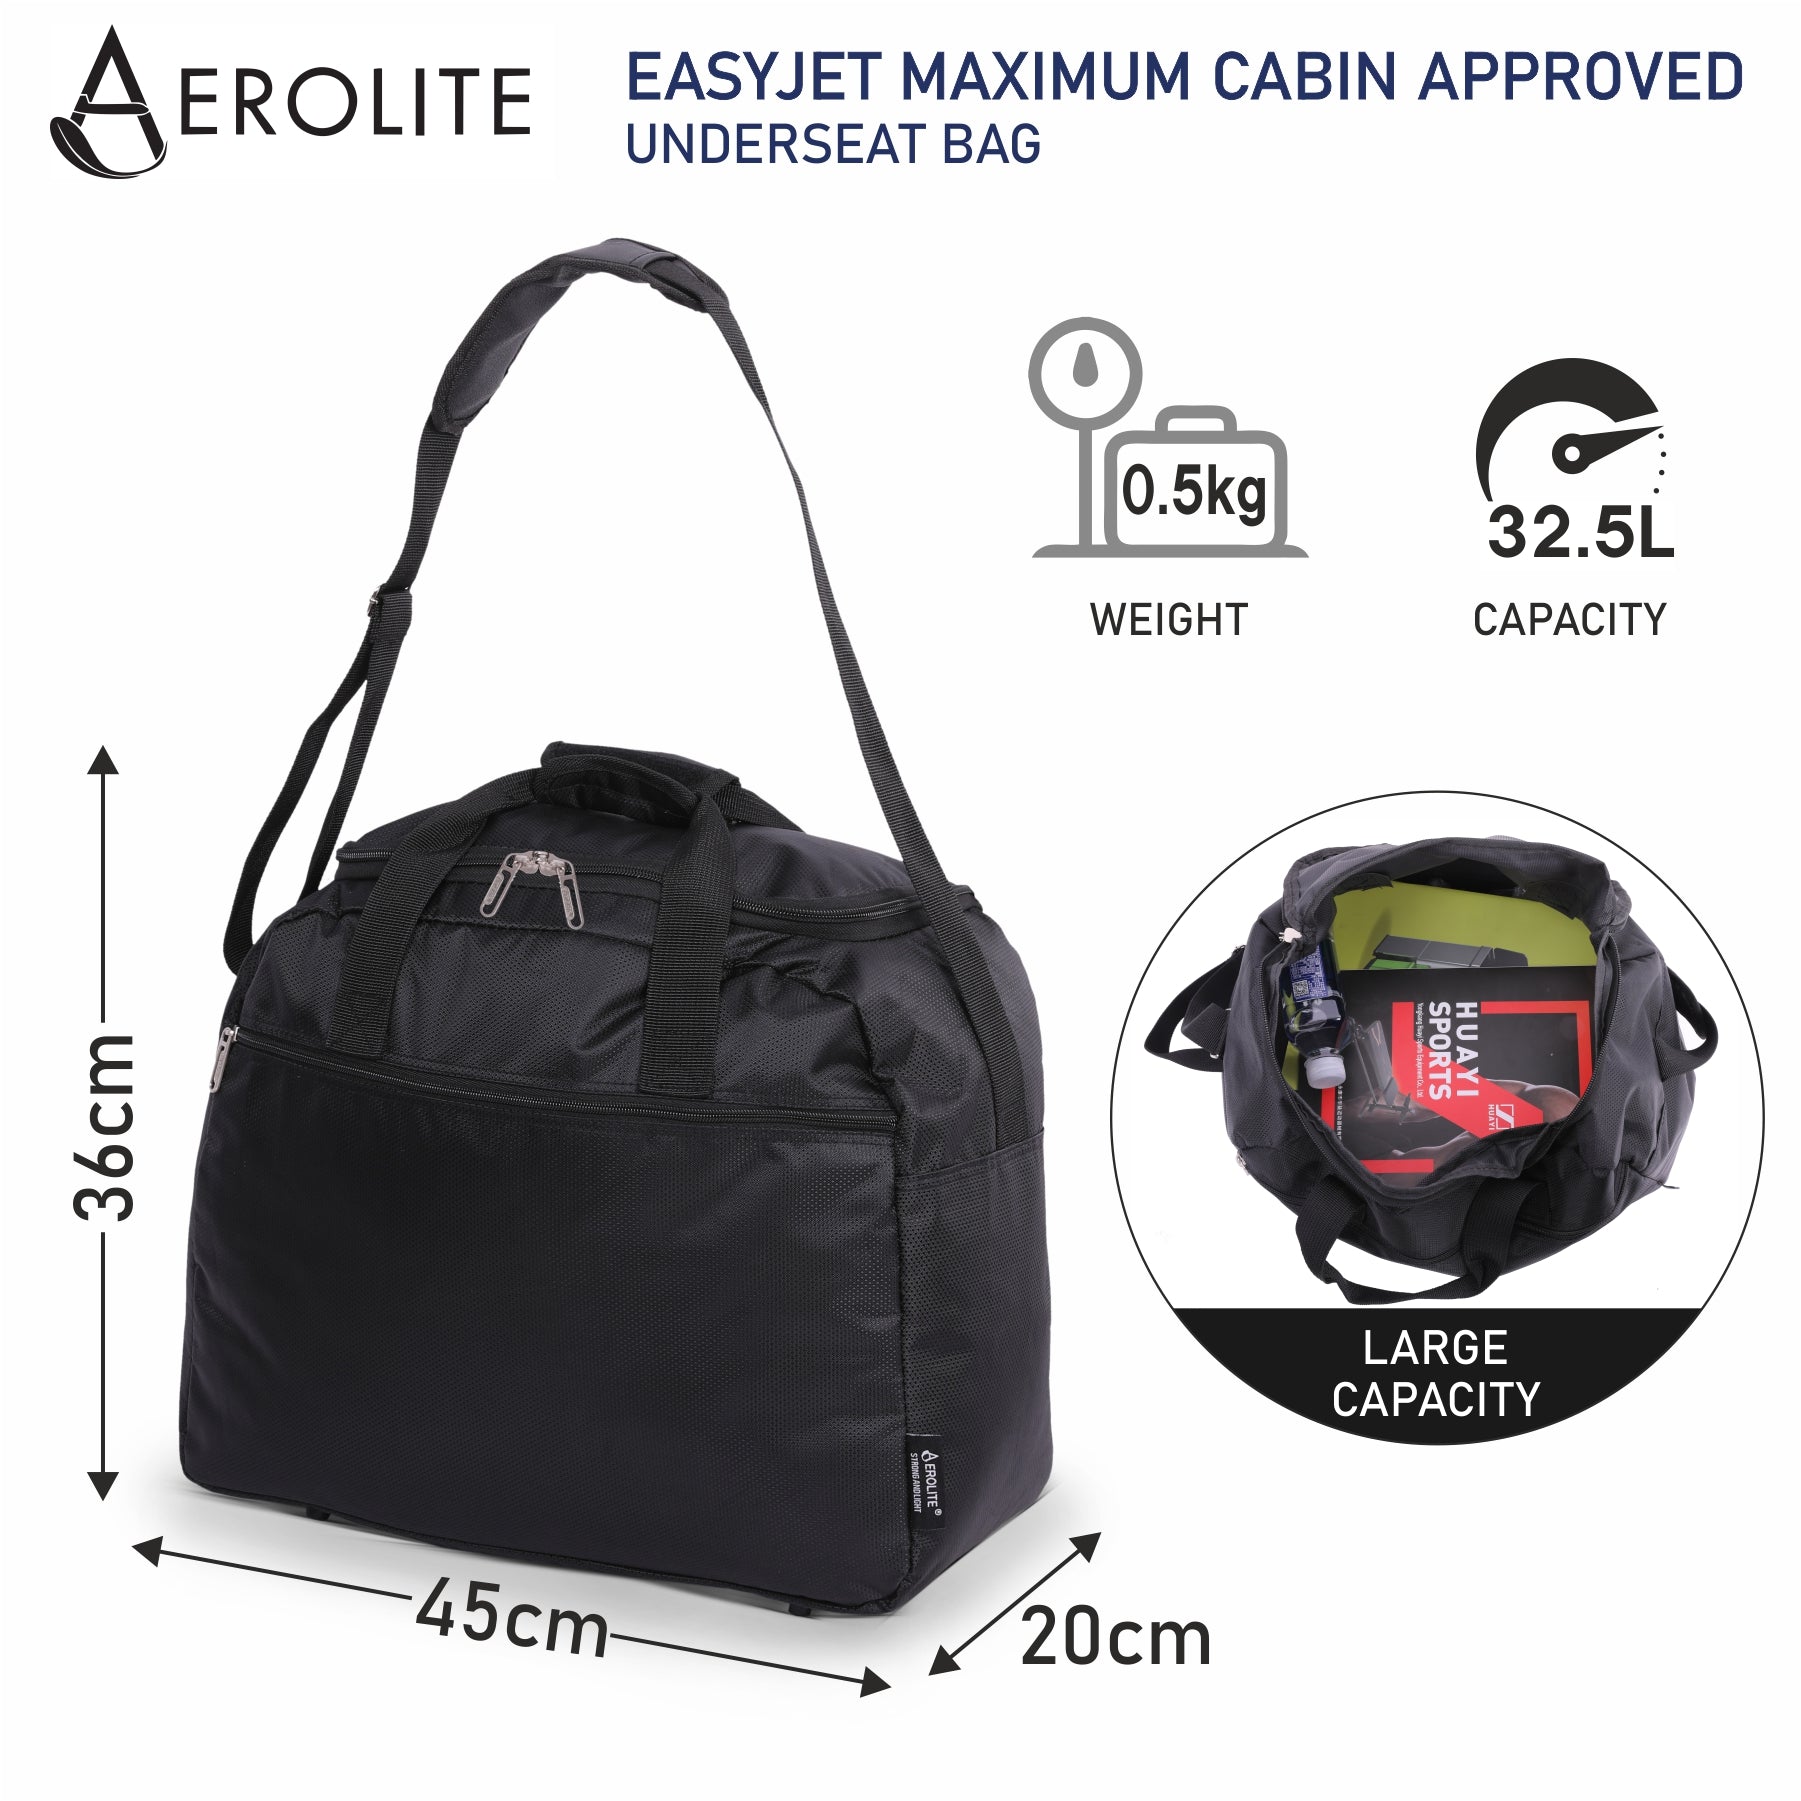 Cabin Bag 45x36x20 For Easyjet Airlines Underseat Travel Bag Holdall